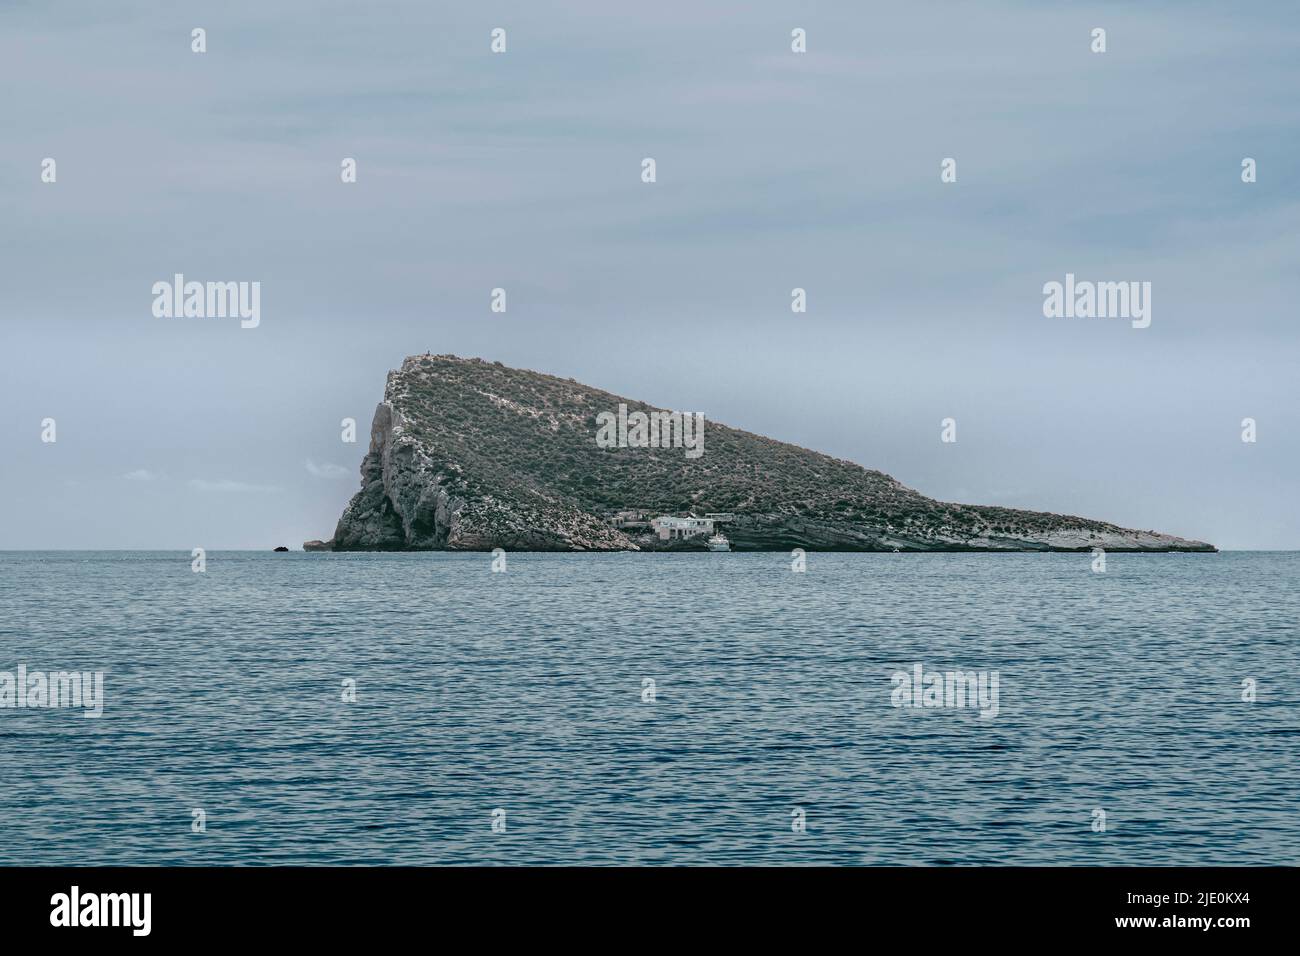 The island or islet of Benidorm or island of journalists, located off the coast with high ecological, landscape and environmental interest., Alicante. Stock Photo